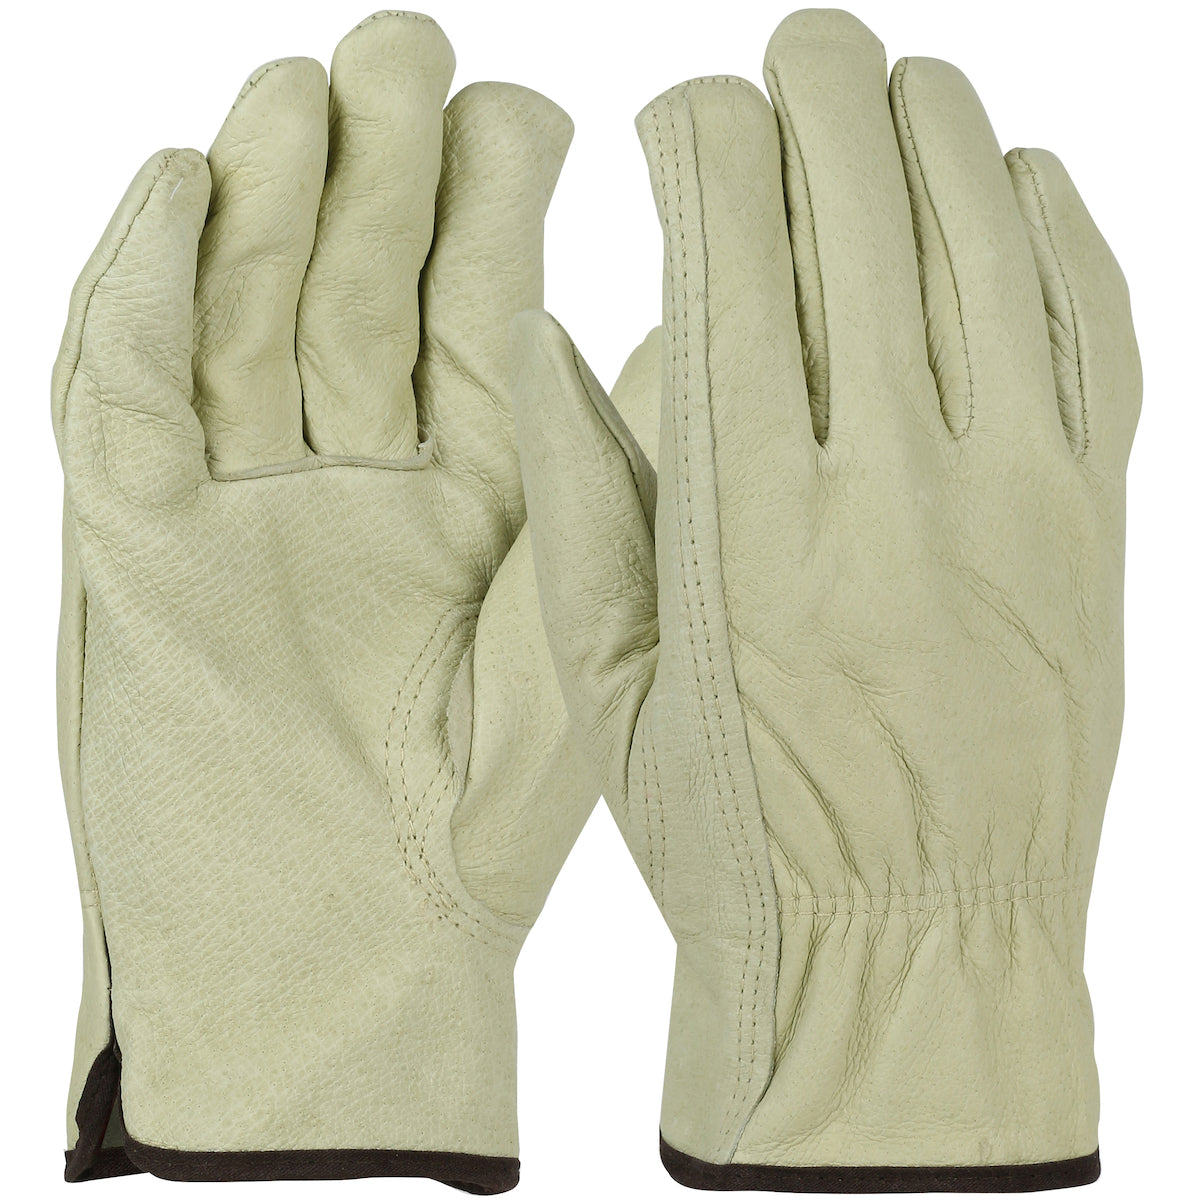 West Chester 994KF/3XL Economy Top Grain Pigskin Leather Drivers Glove with Red Fleece Lining - Keystone Thumb